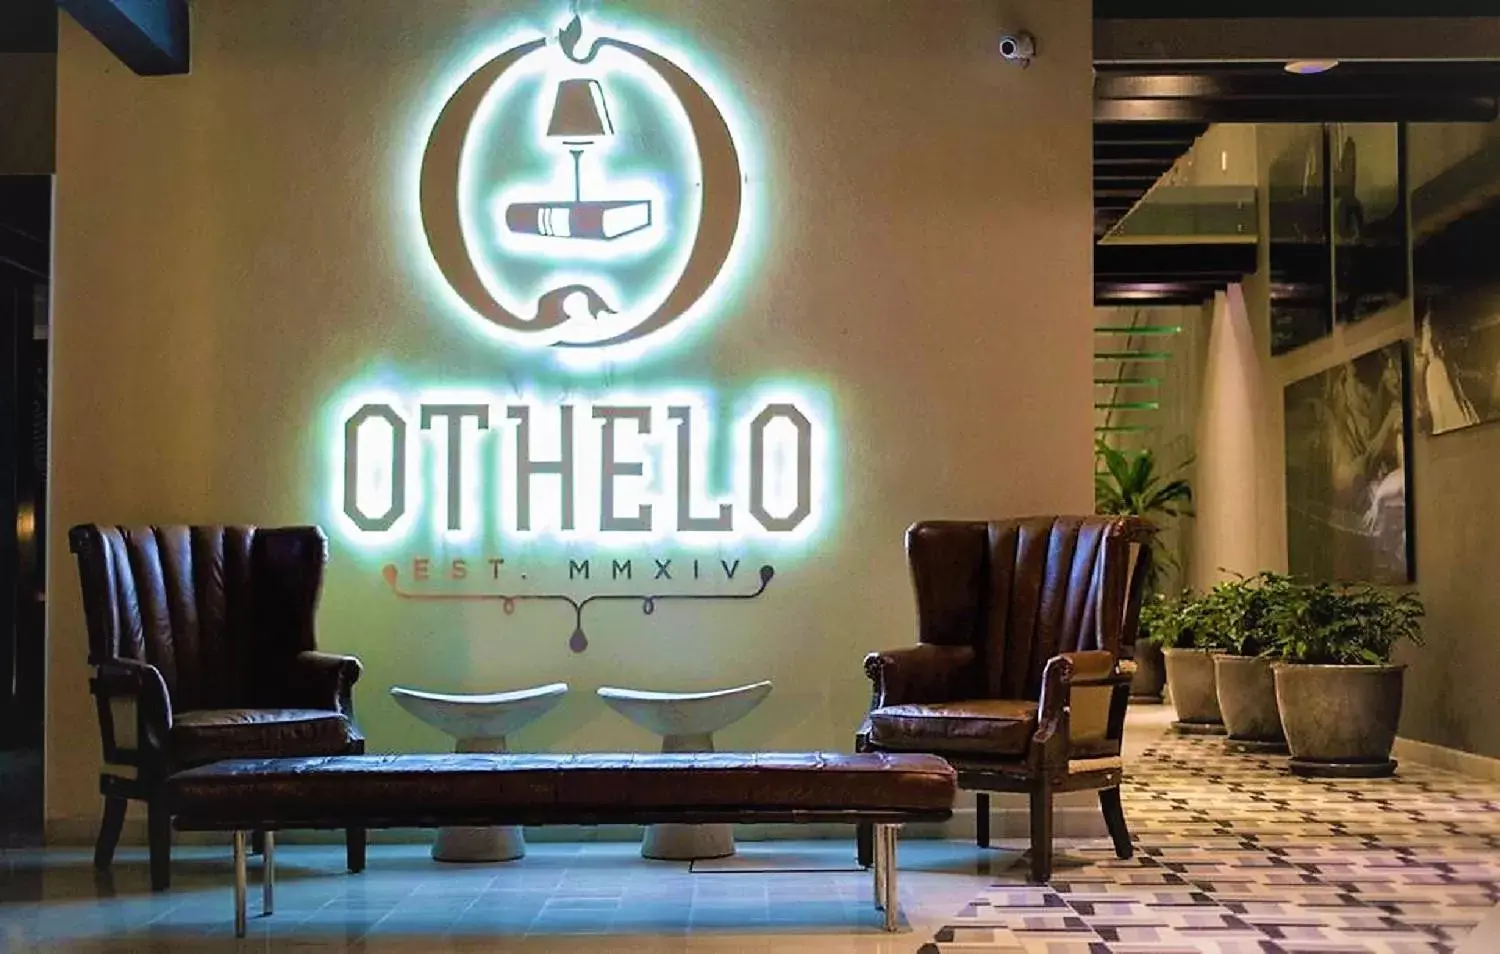 Property logo or sign, Lobby/Reception in Othelo Boutique Hotel Mexico